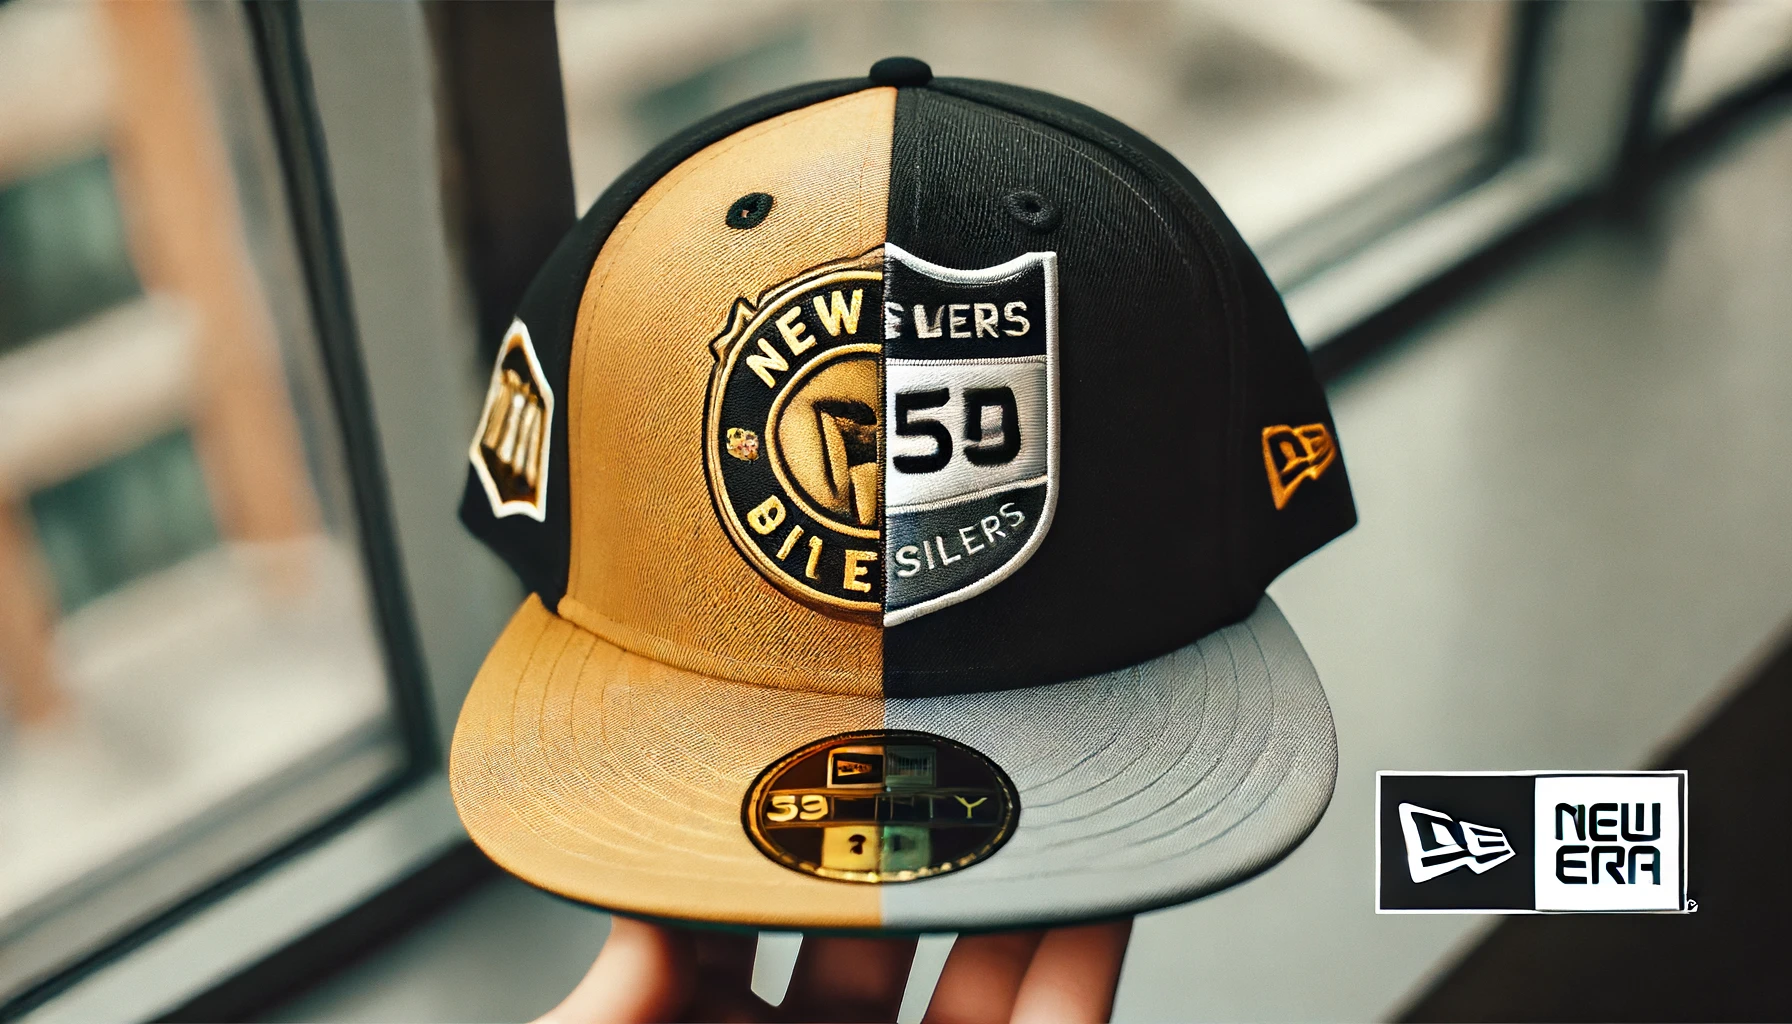 A New Era cap with both a gold and silver sticker on the brim, prominently displayed. The cap is positioned to clearly show both stickers.